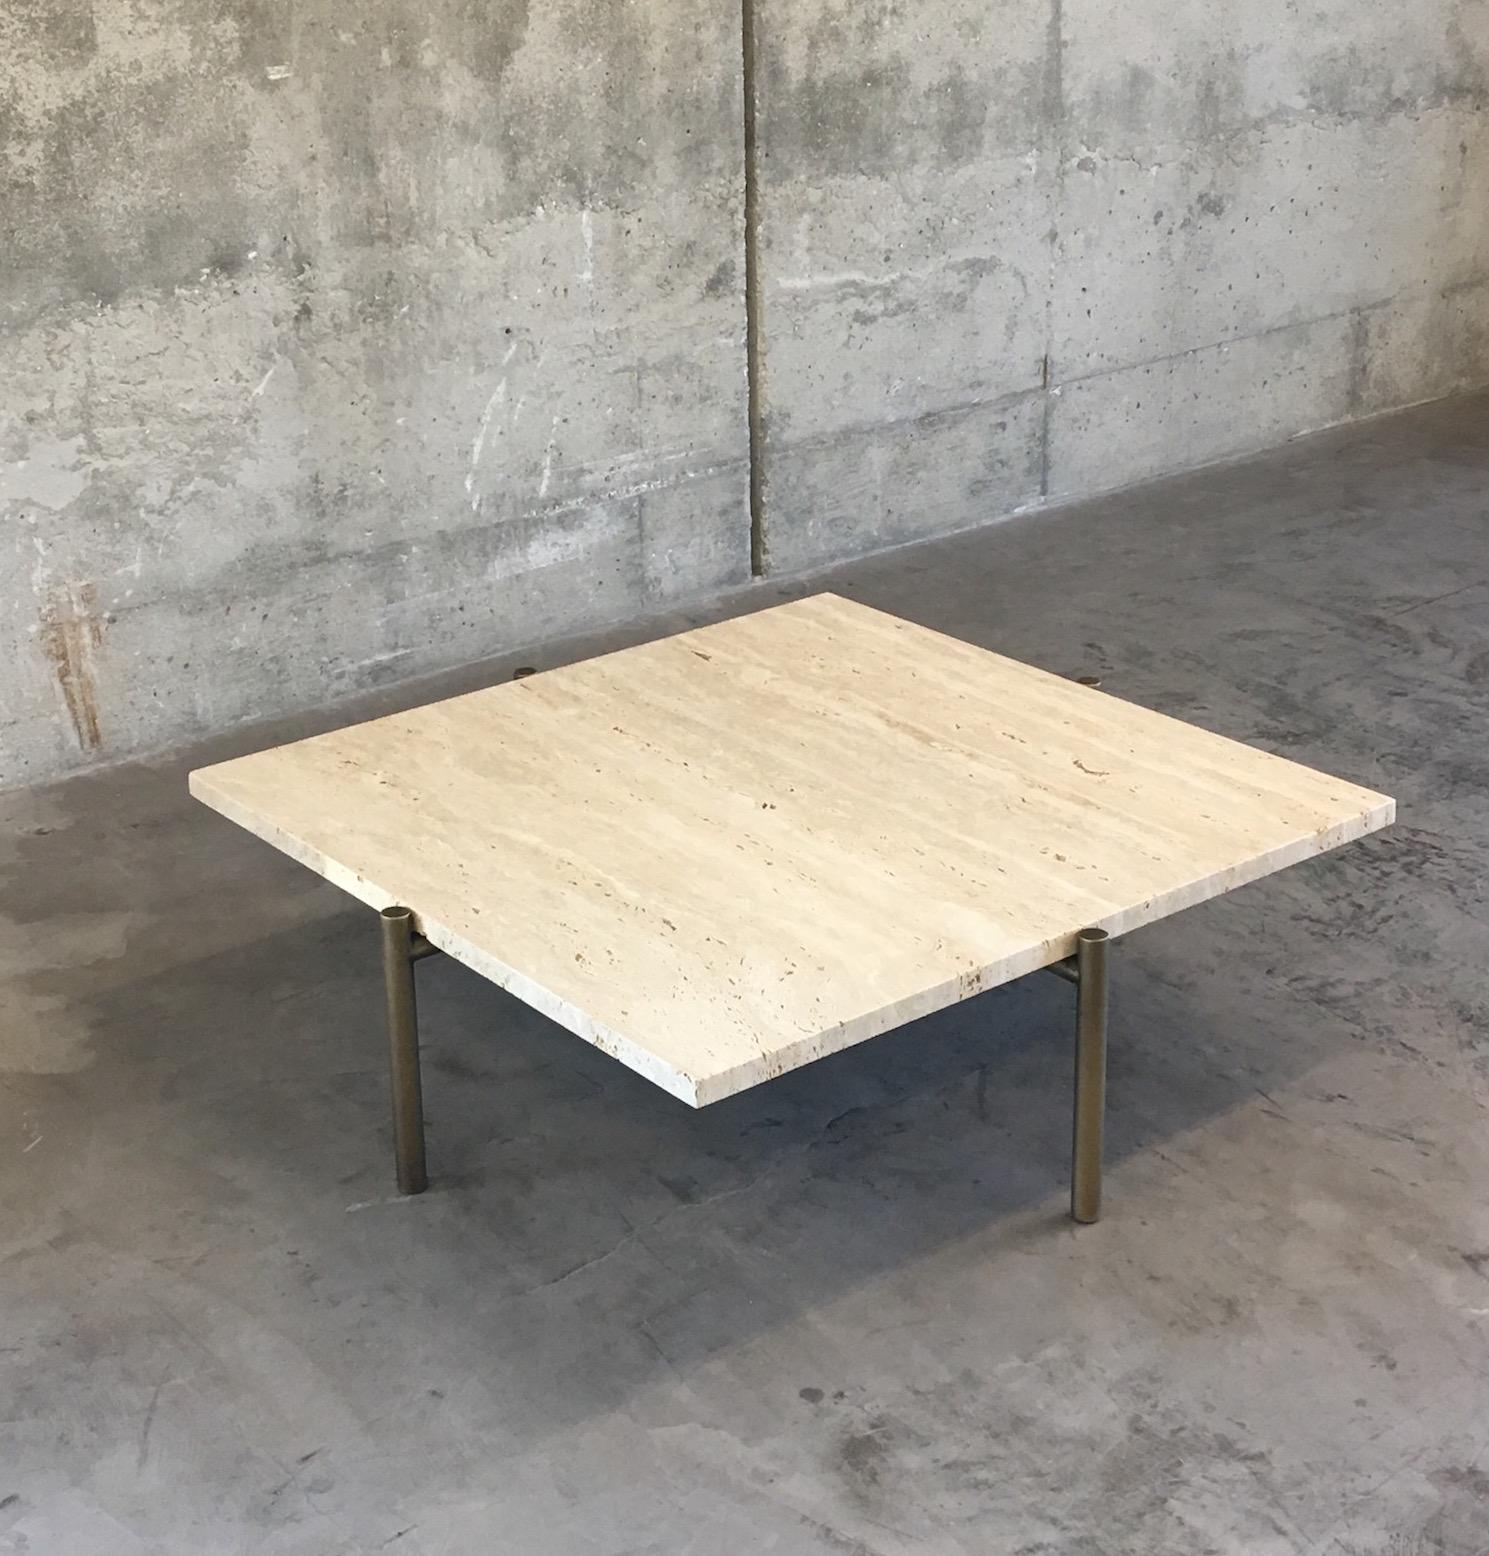 Ten10 Tivoli coffee table with 4 legs and a square top. The base is stainless steel tube plated in either oil rubbed bronze or burnished brass. It can also be polished or brushed stainless steel. The top is 3cm thick vein cut unfilled honed